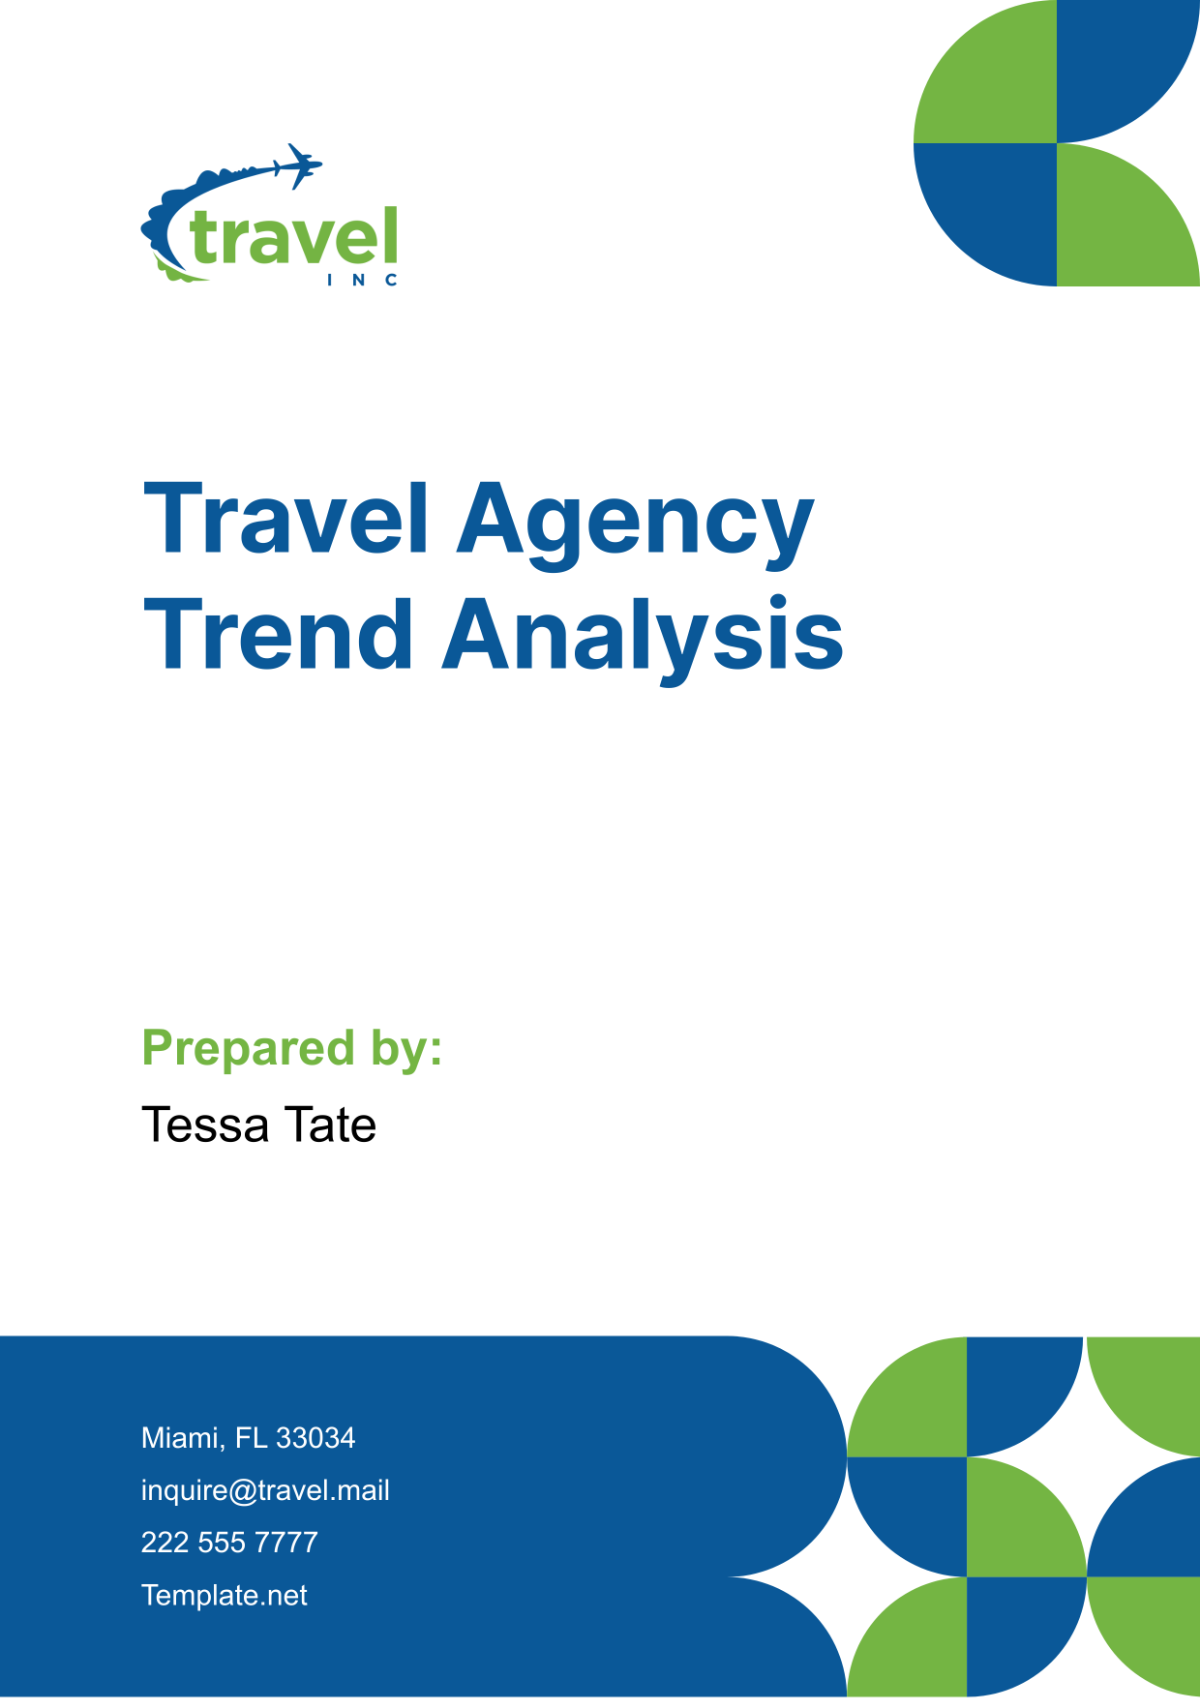 Travel Agency Trend Analysis Template